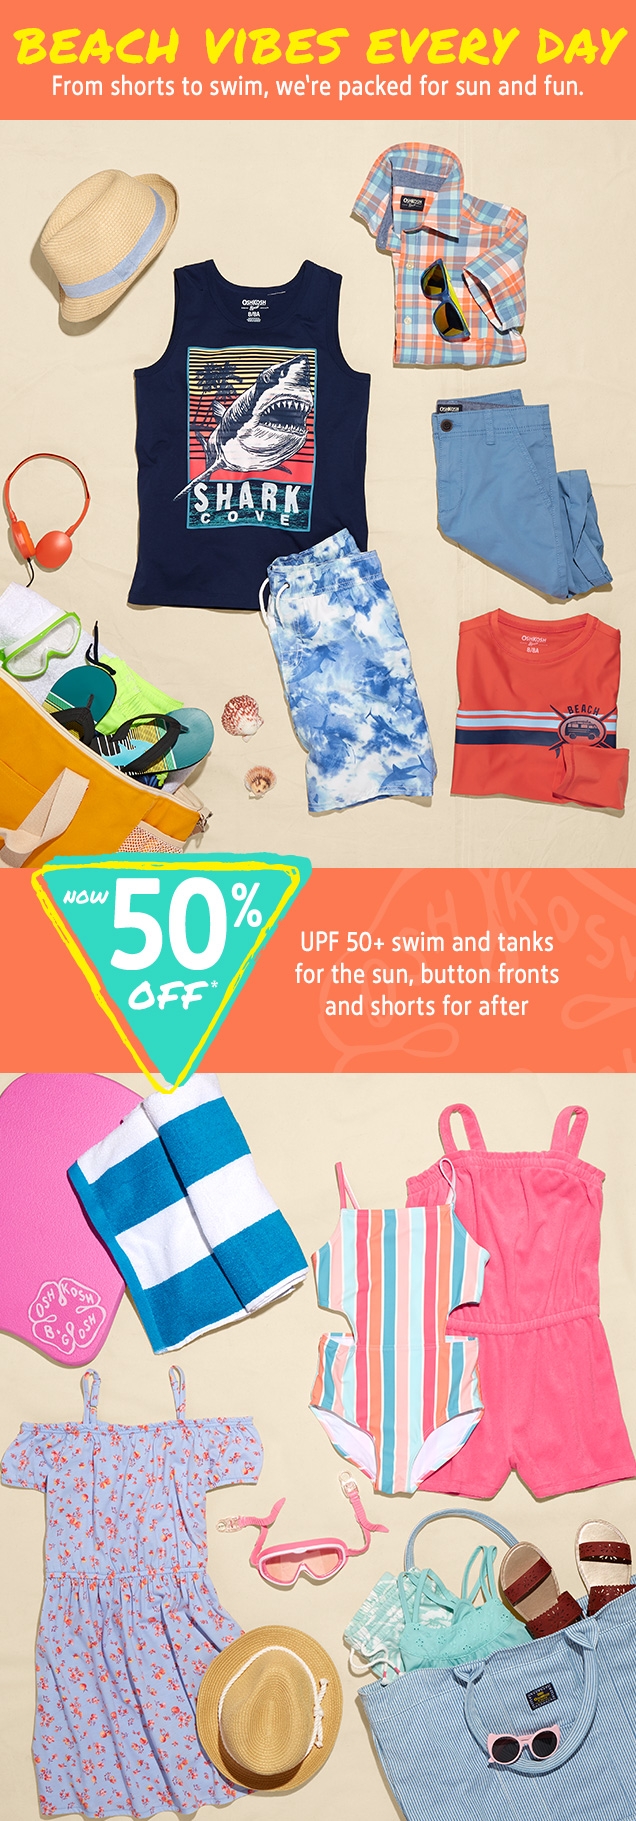 BEACH VIBES EVERY DAY | From shorts to swim, we're packed for sun and fun. | NOW 50% OFF* | UPF 50+ swim and tanks for the sun, button fronts and shorts for after